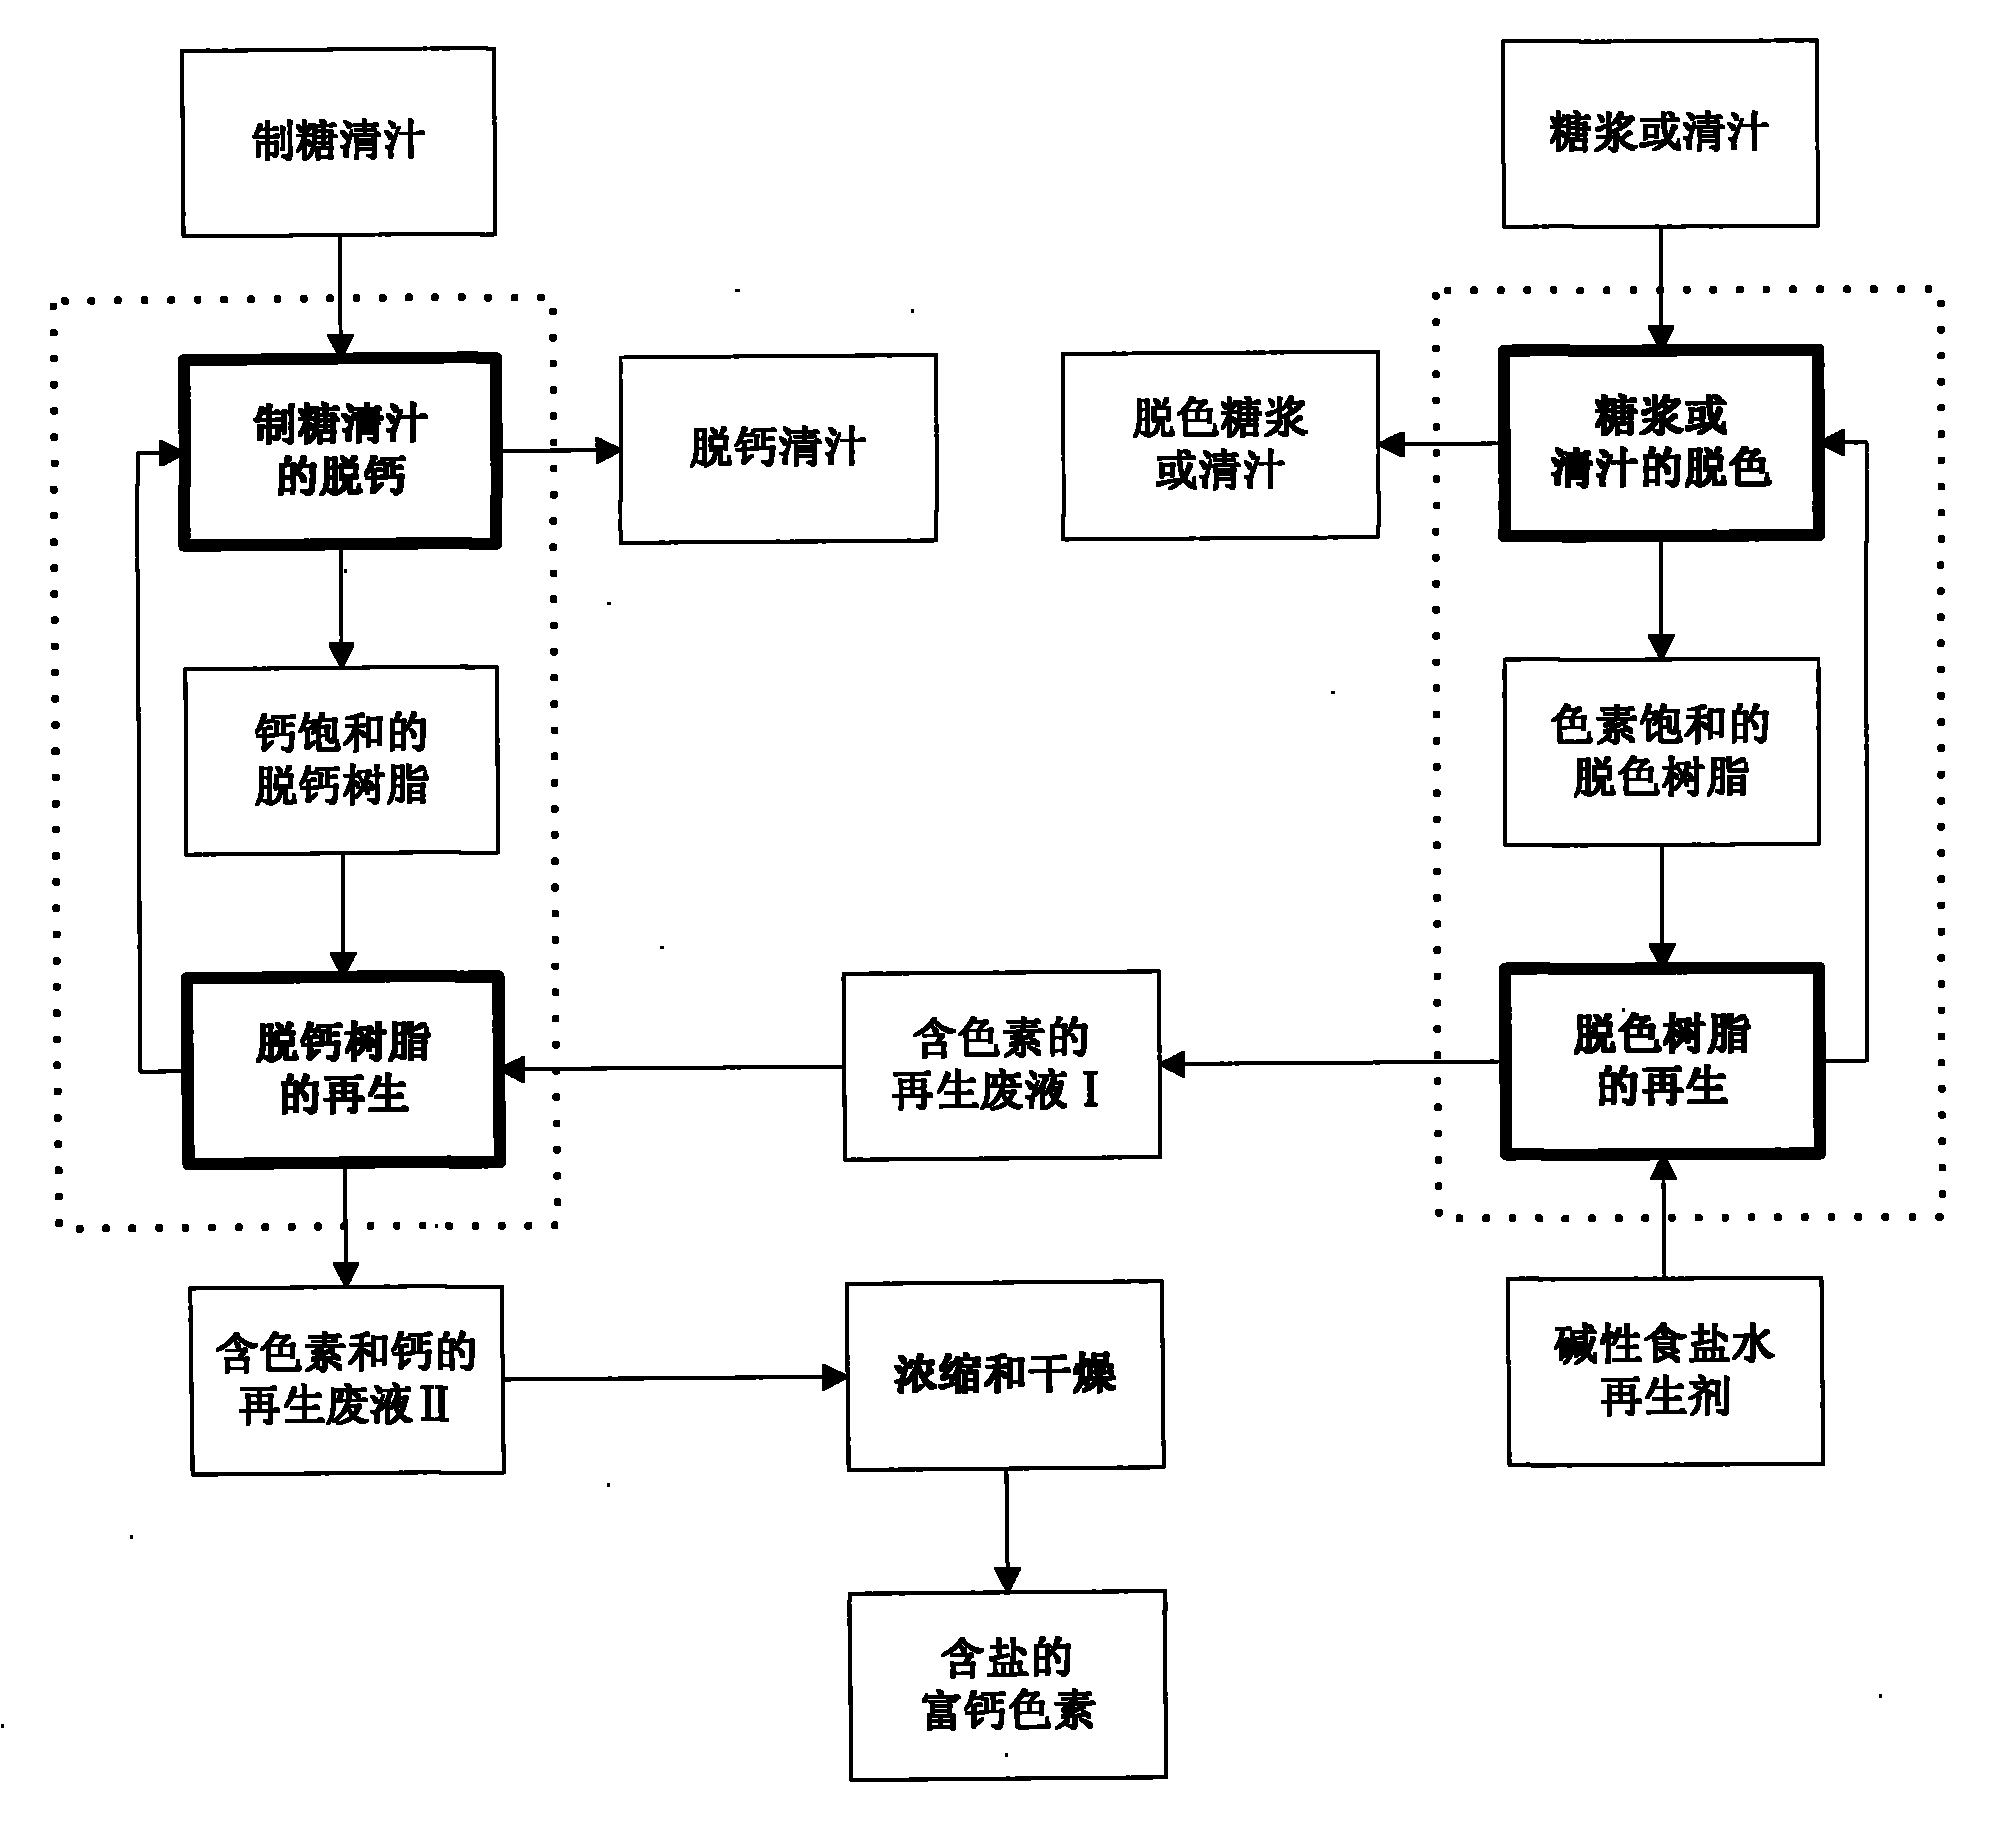 Method for regenerating sugar making decolorized and decalcified resin and method for recycling regeneration waste liquid